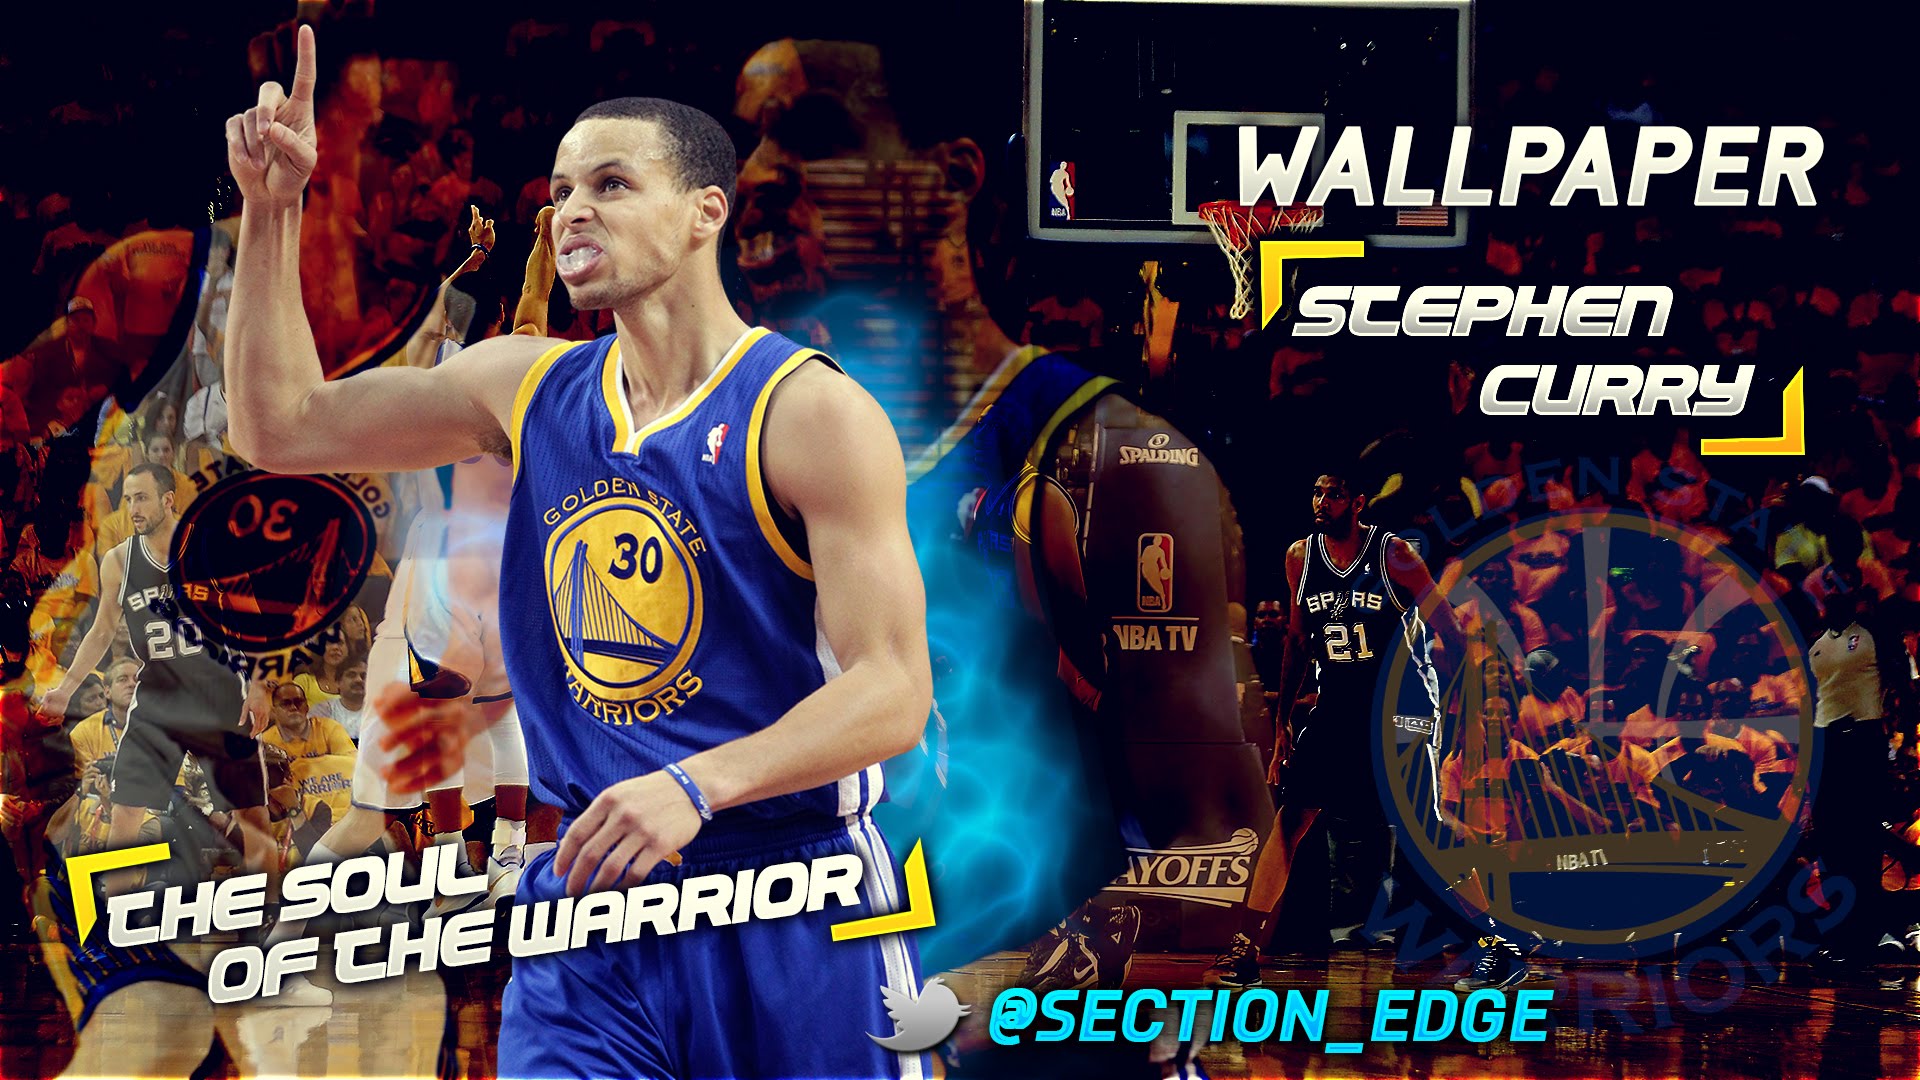 steph curry live wallpapers,basketball player,basketball,basketball moves,sports,team sport